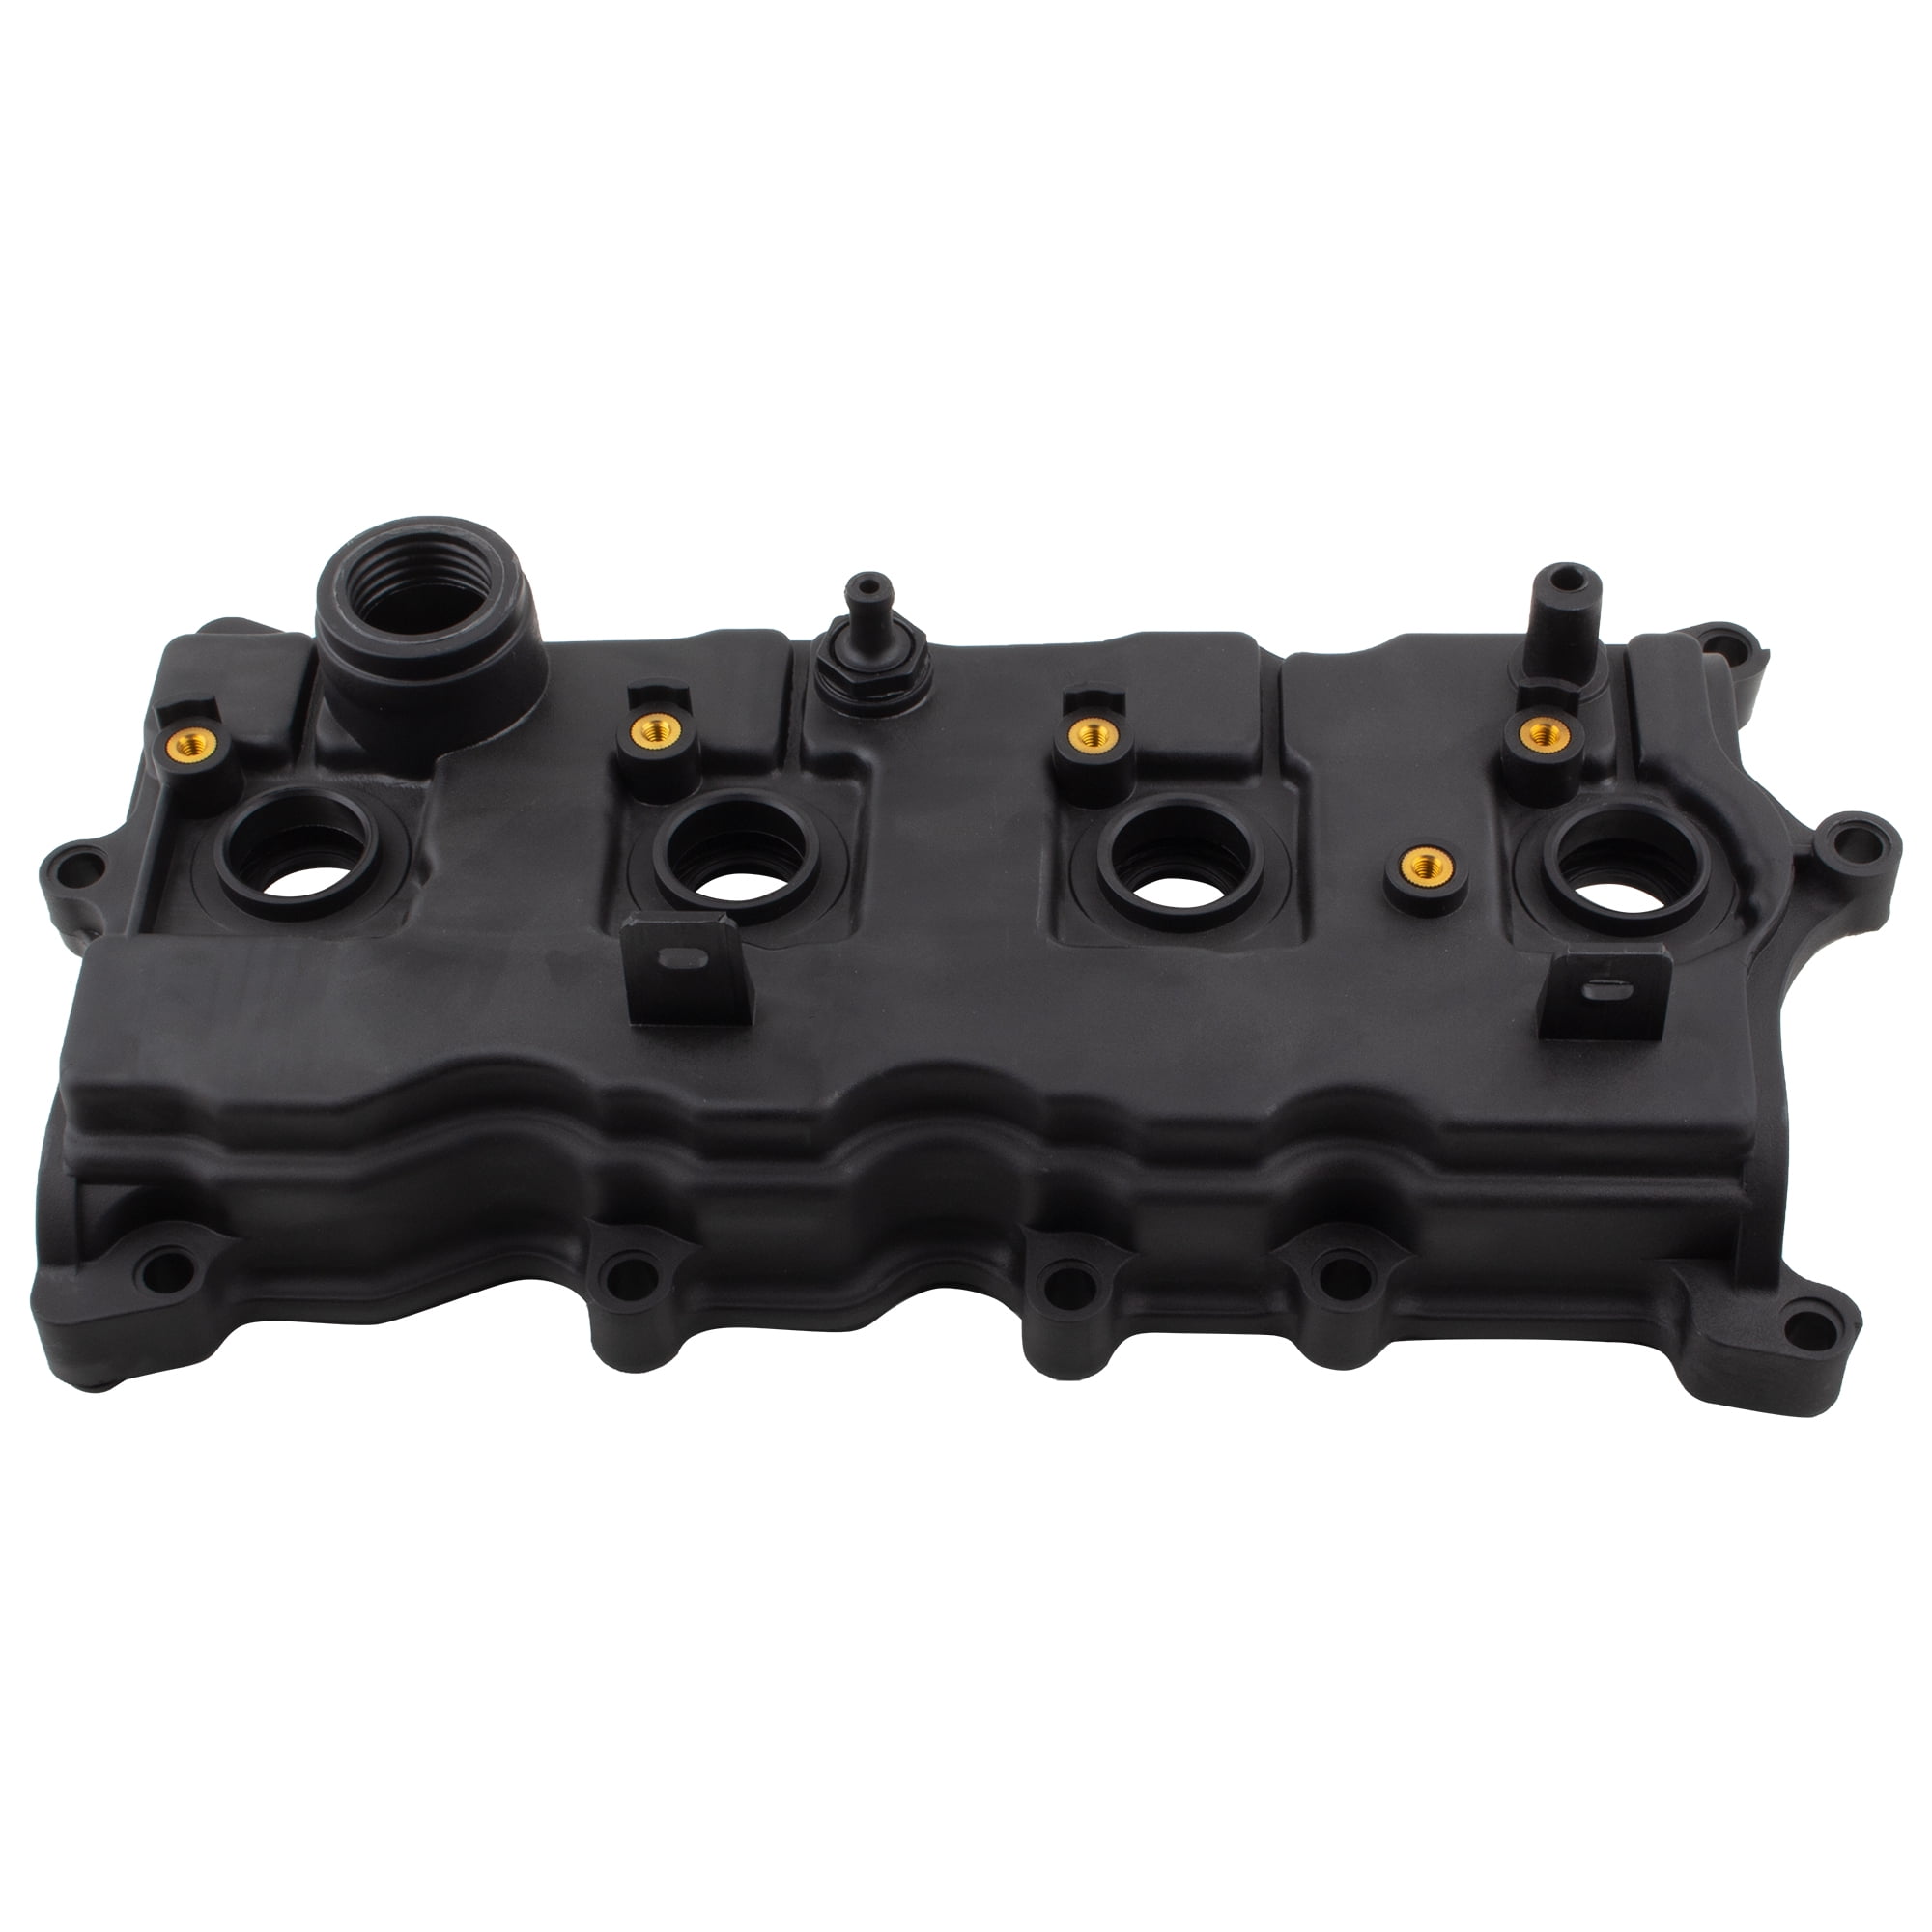 Garage-Pro Head Gasket Set Compatible with 2007-2012 Nissan Altima/Sentra with Cylinder Head Bolt 4 Cyl 2.5L eng.